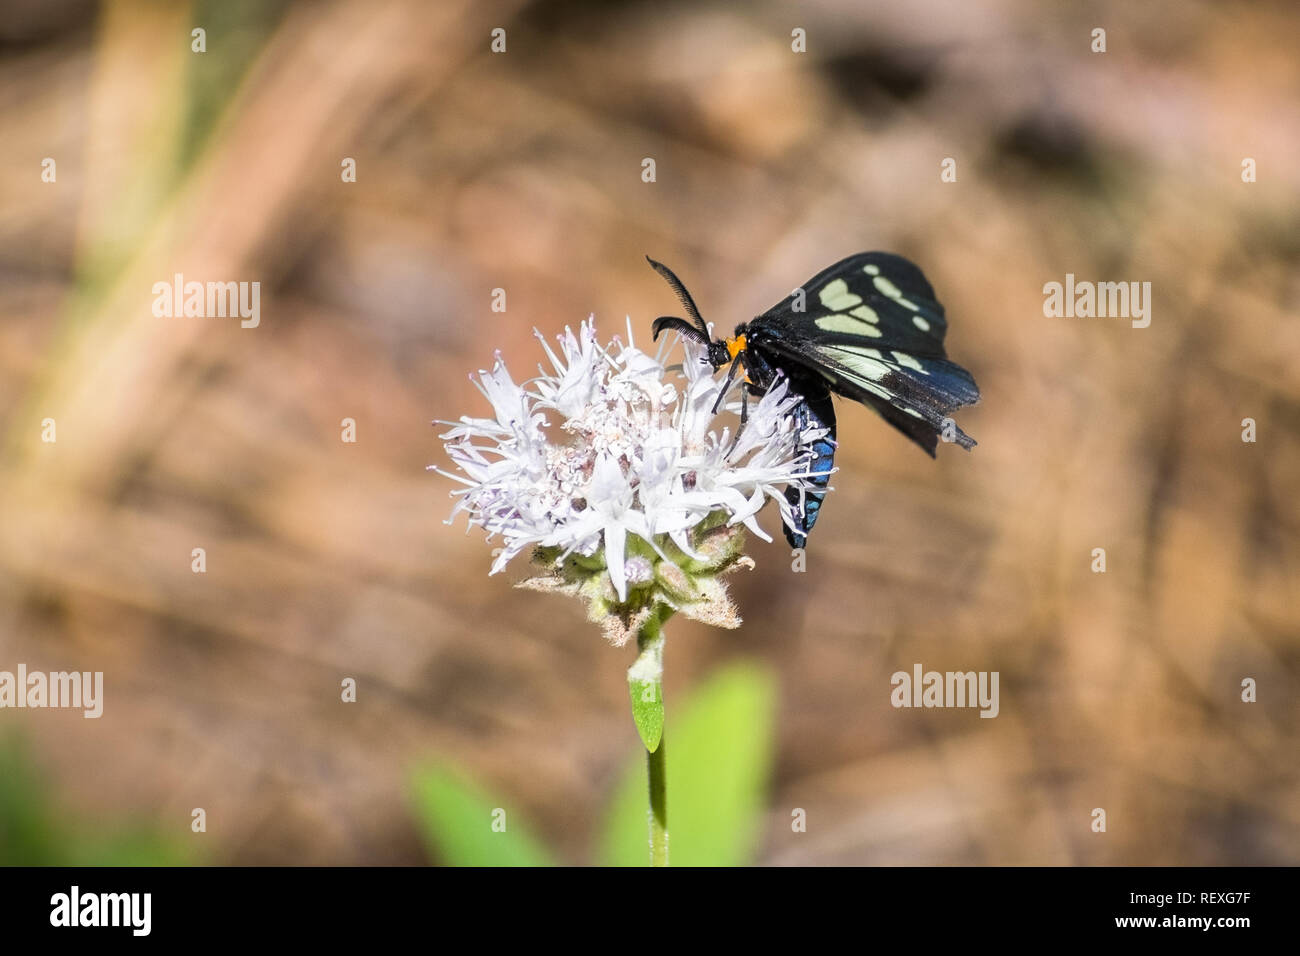 Police-car moth (Gnophaela vermiculata) feeding on a mountain coyote mint wildflower, Northern Calfiornia Stock Photo